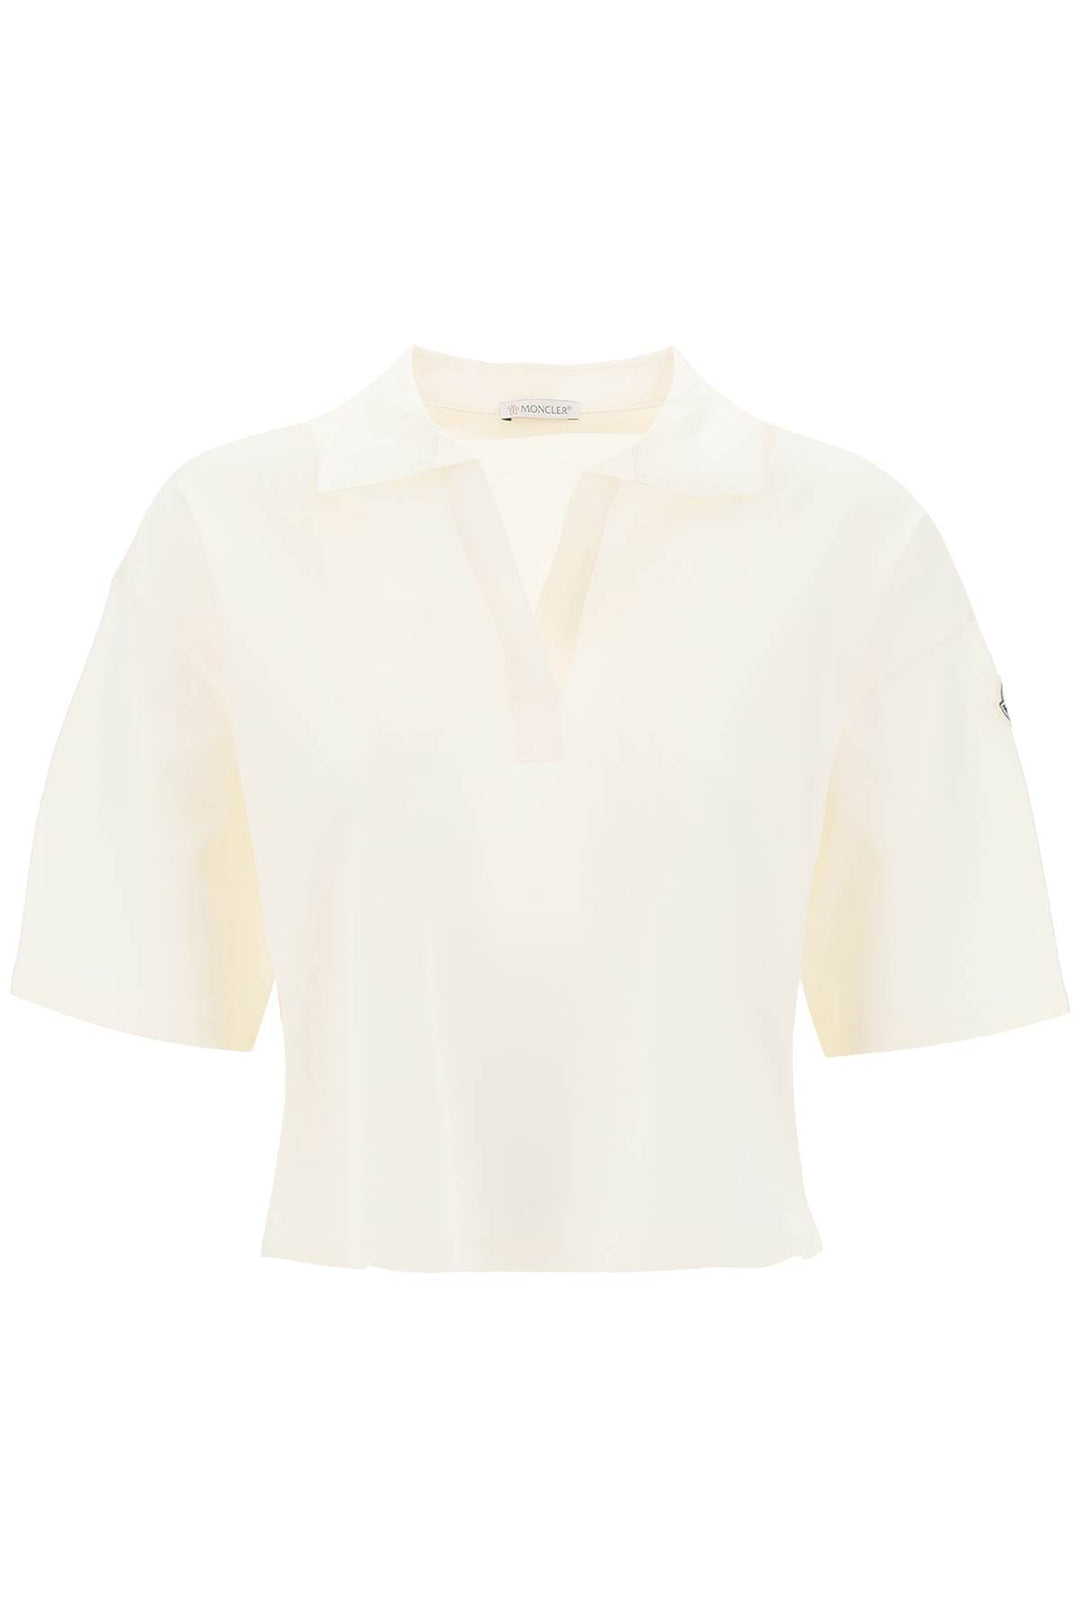 Moncler Polo Shirt With Poplin Inserts   Bianco